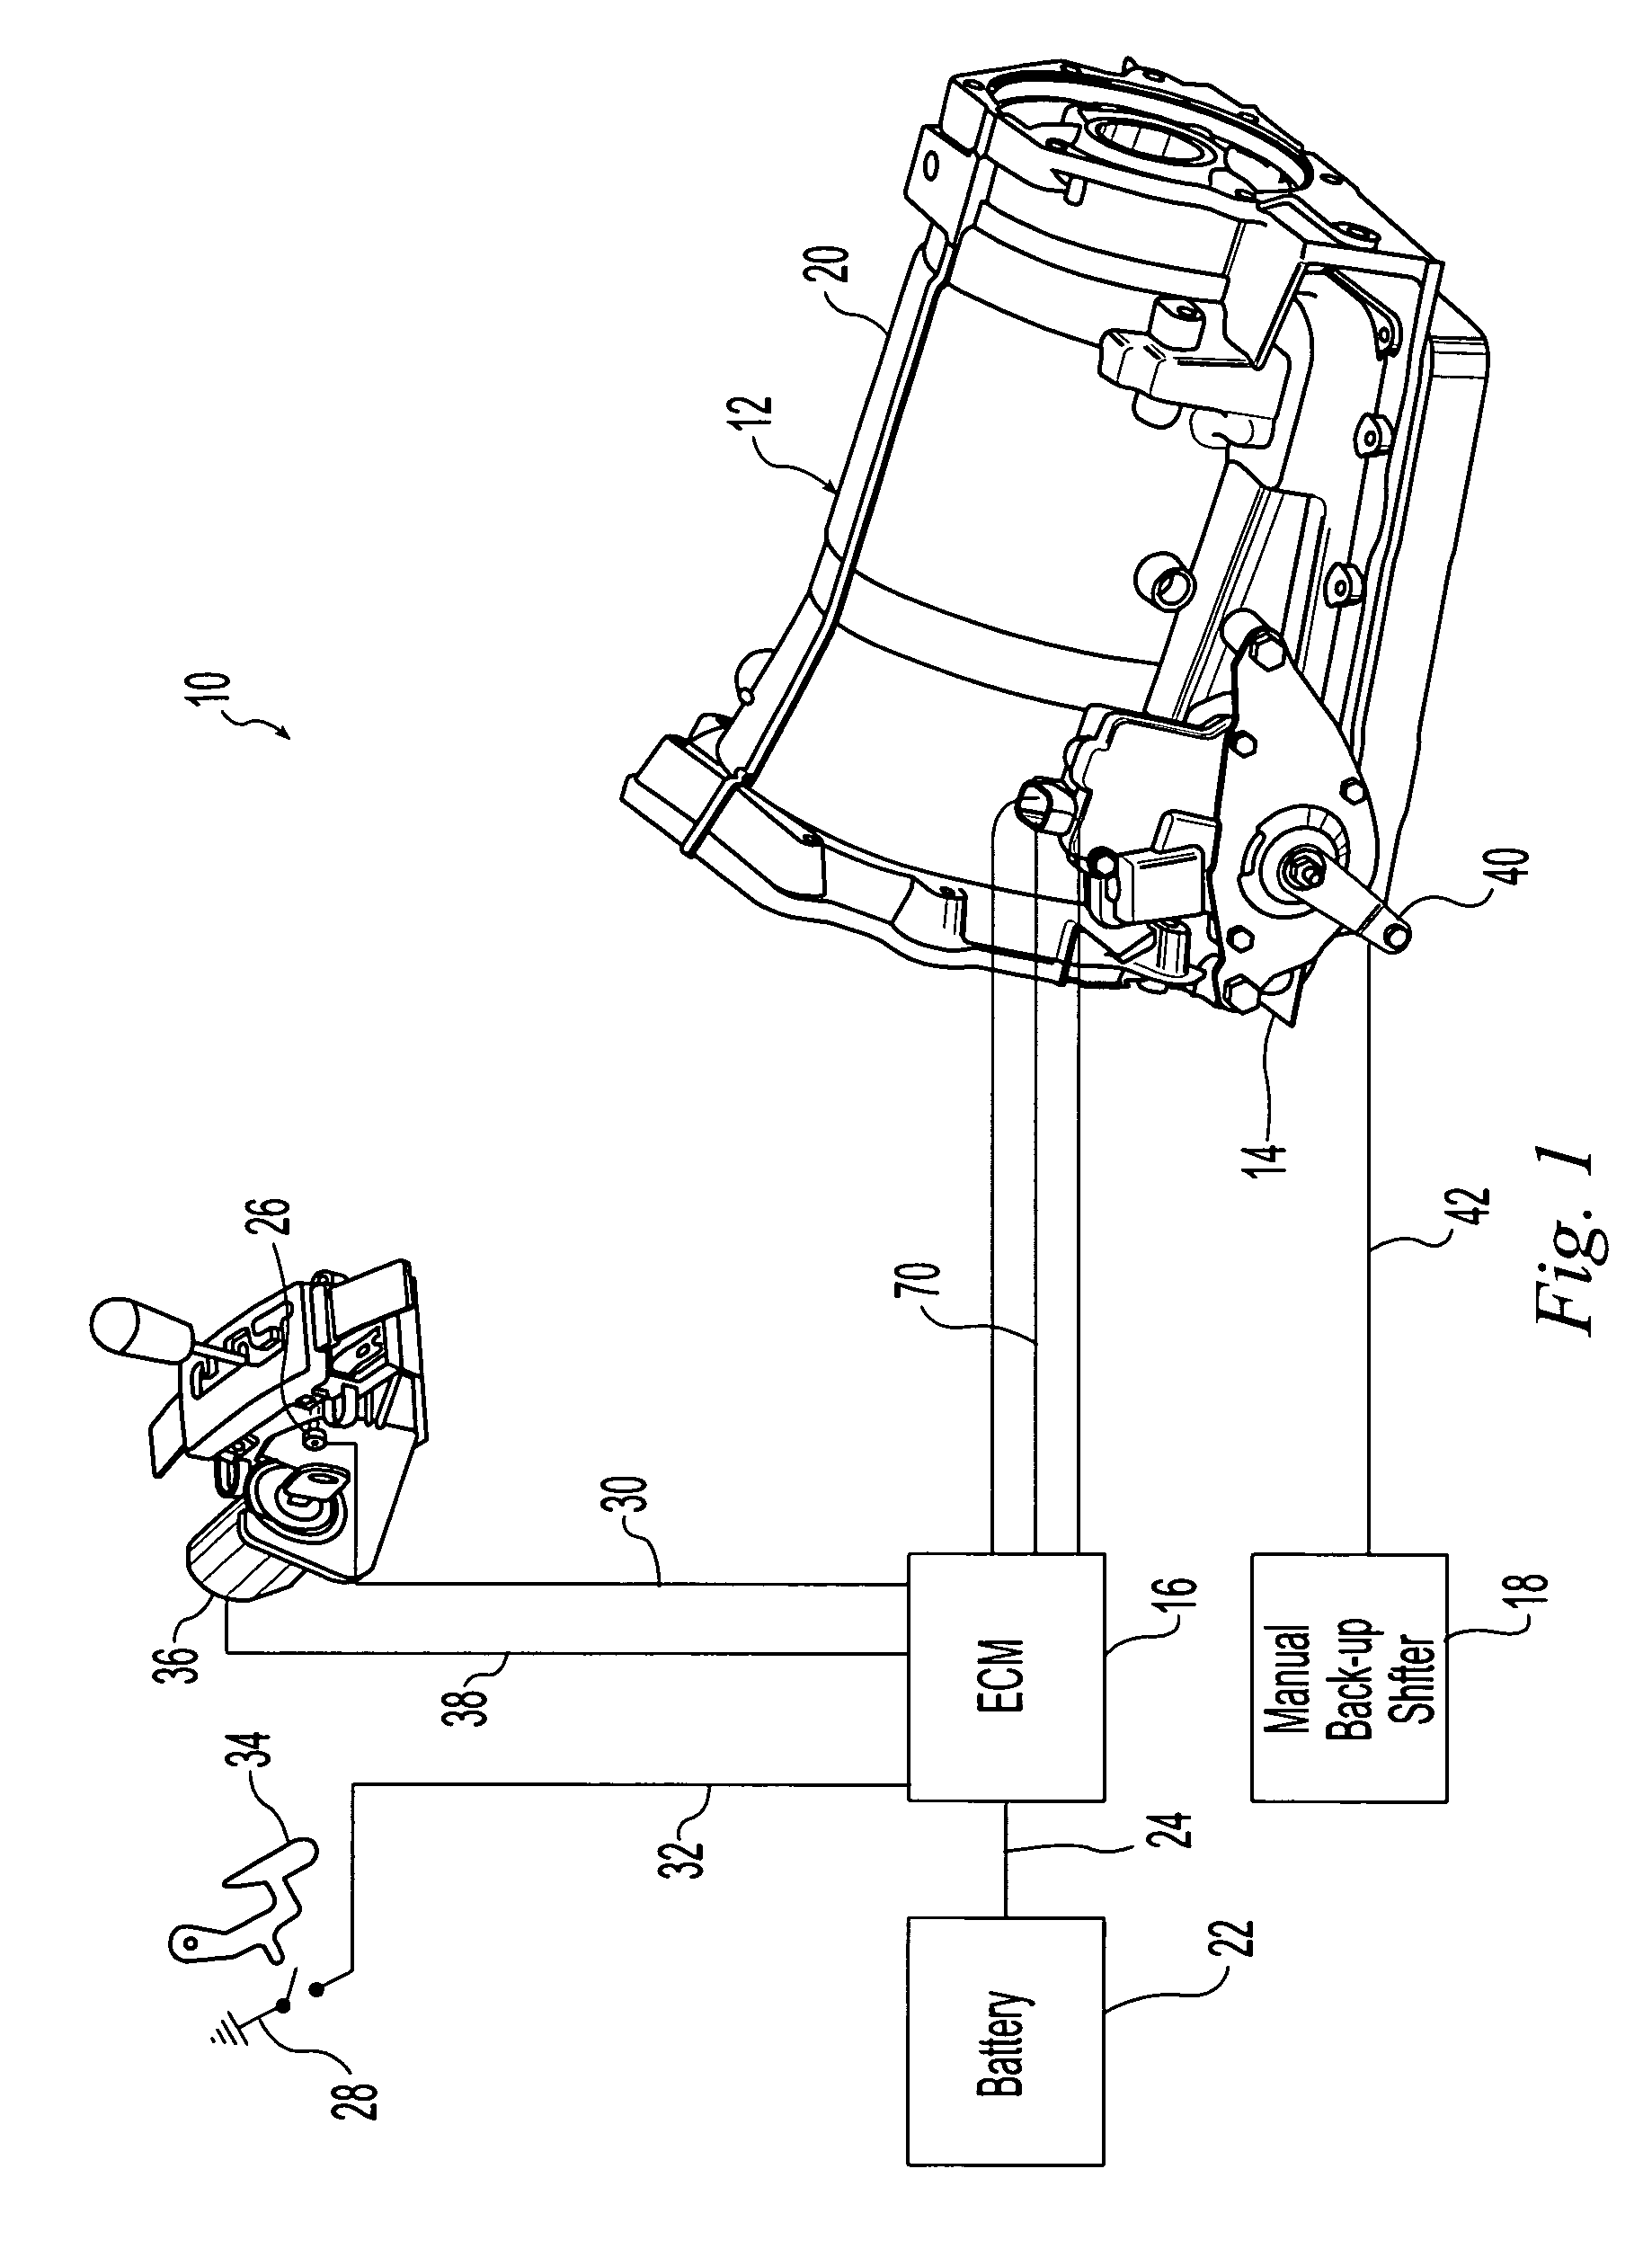 Actuator for shift-by-wire automatic transmission system